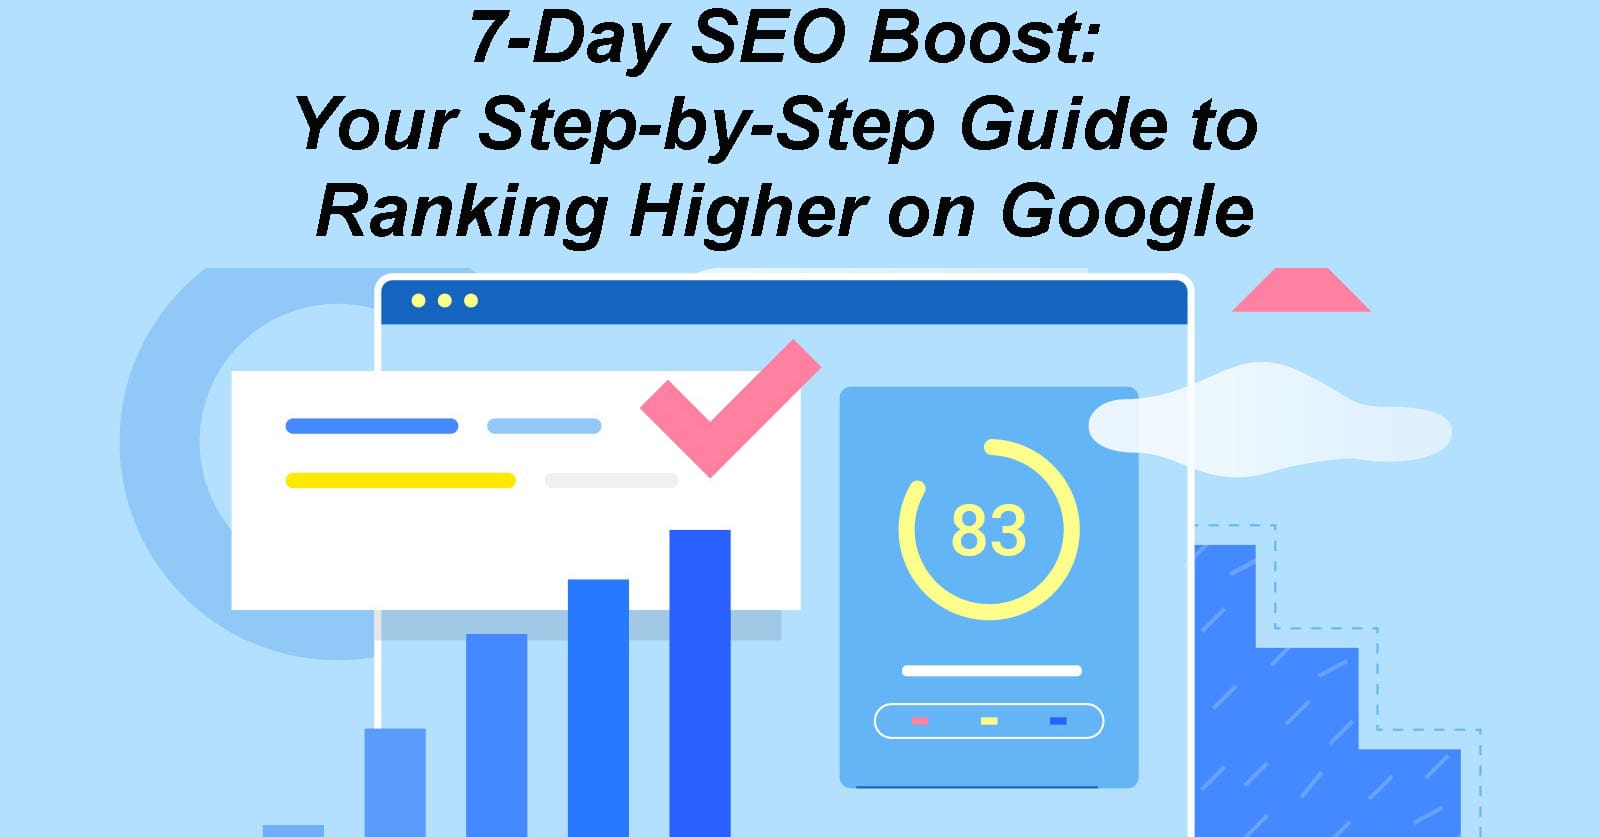 7-Day SEO Boost Your Step-by-Step Guide to Ranking Higher on Google